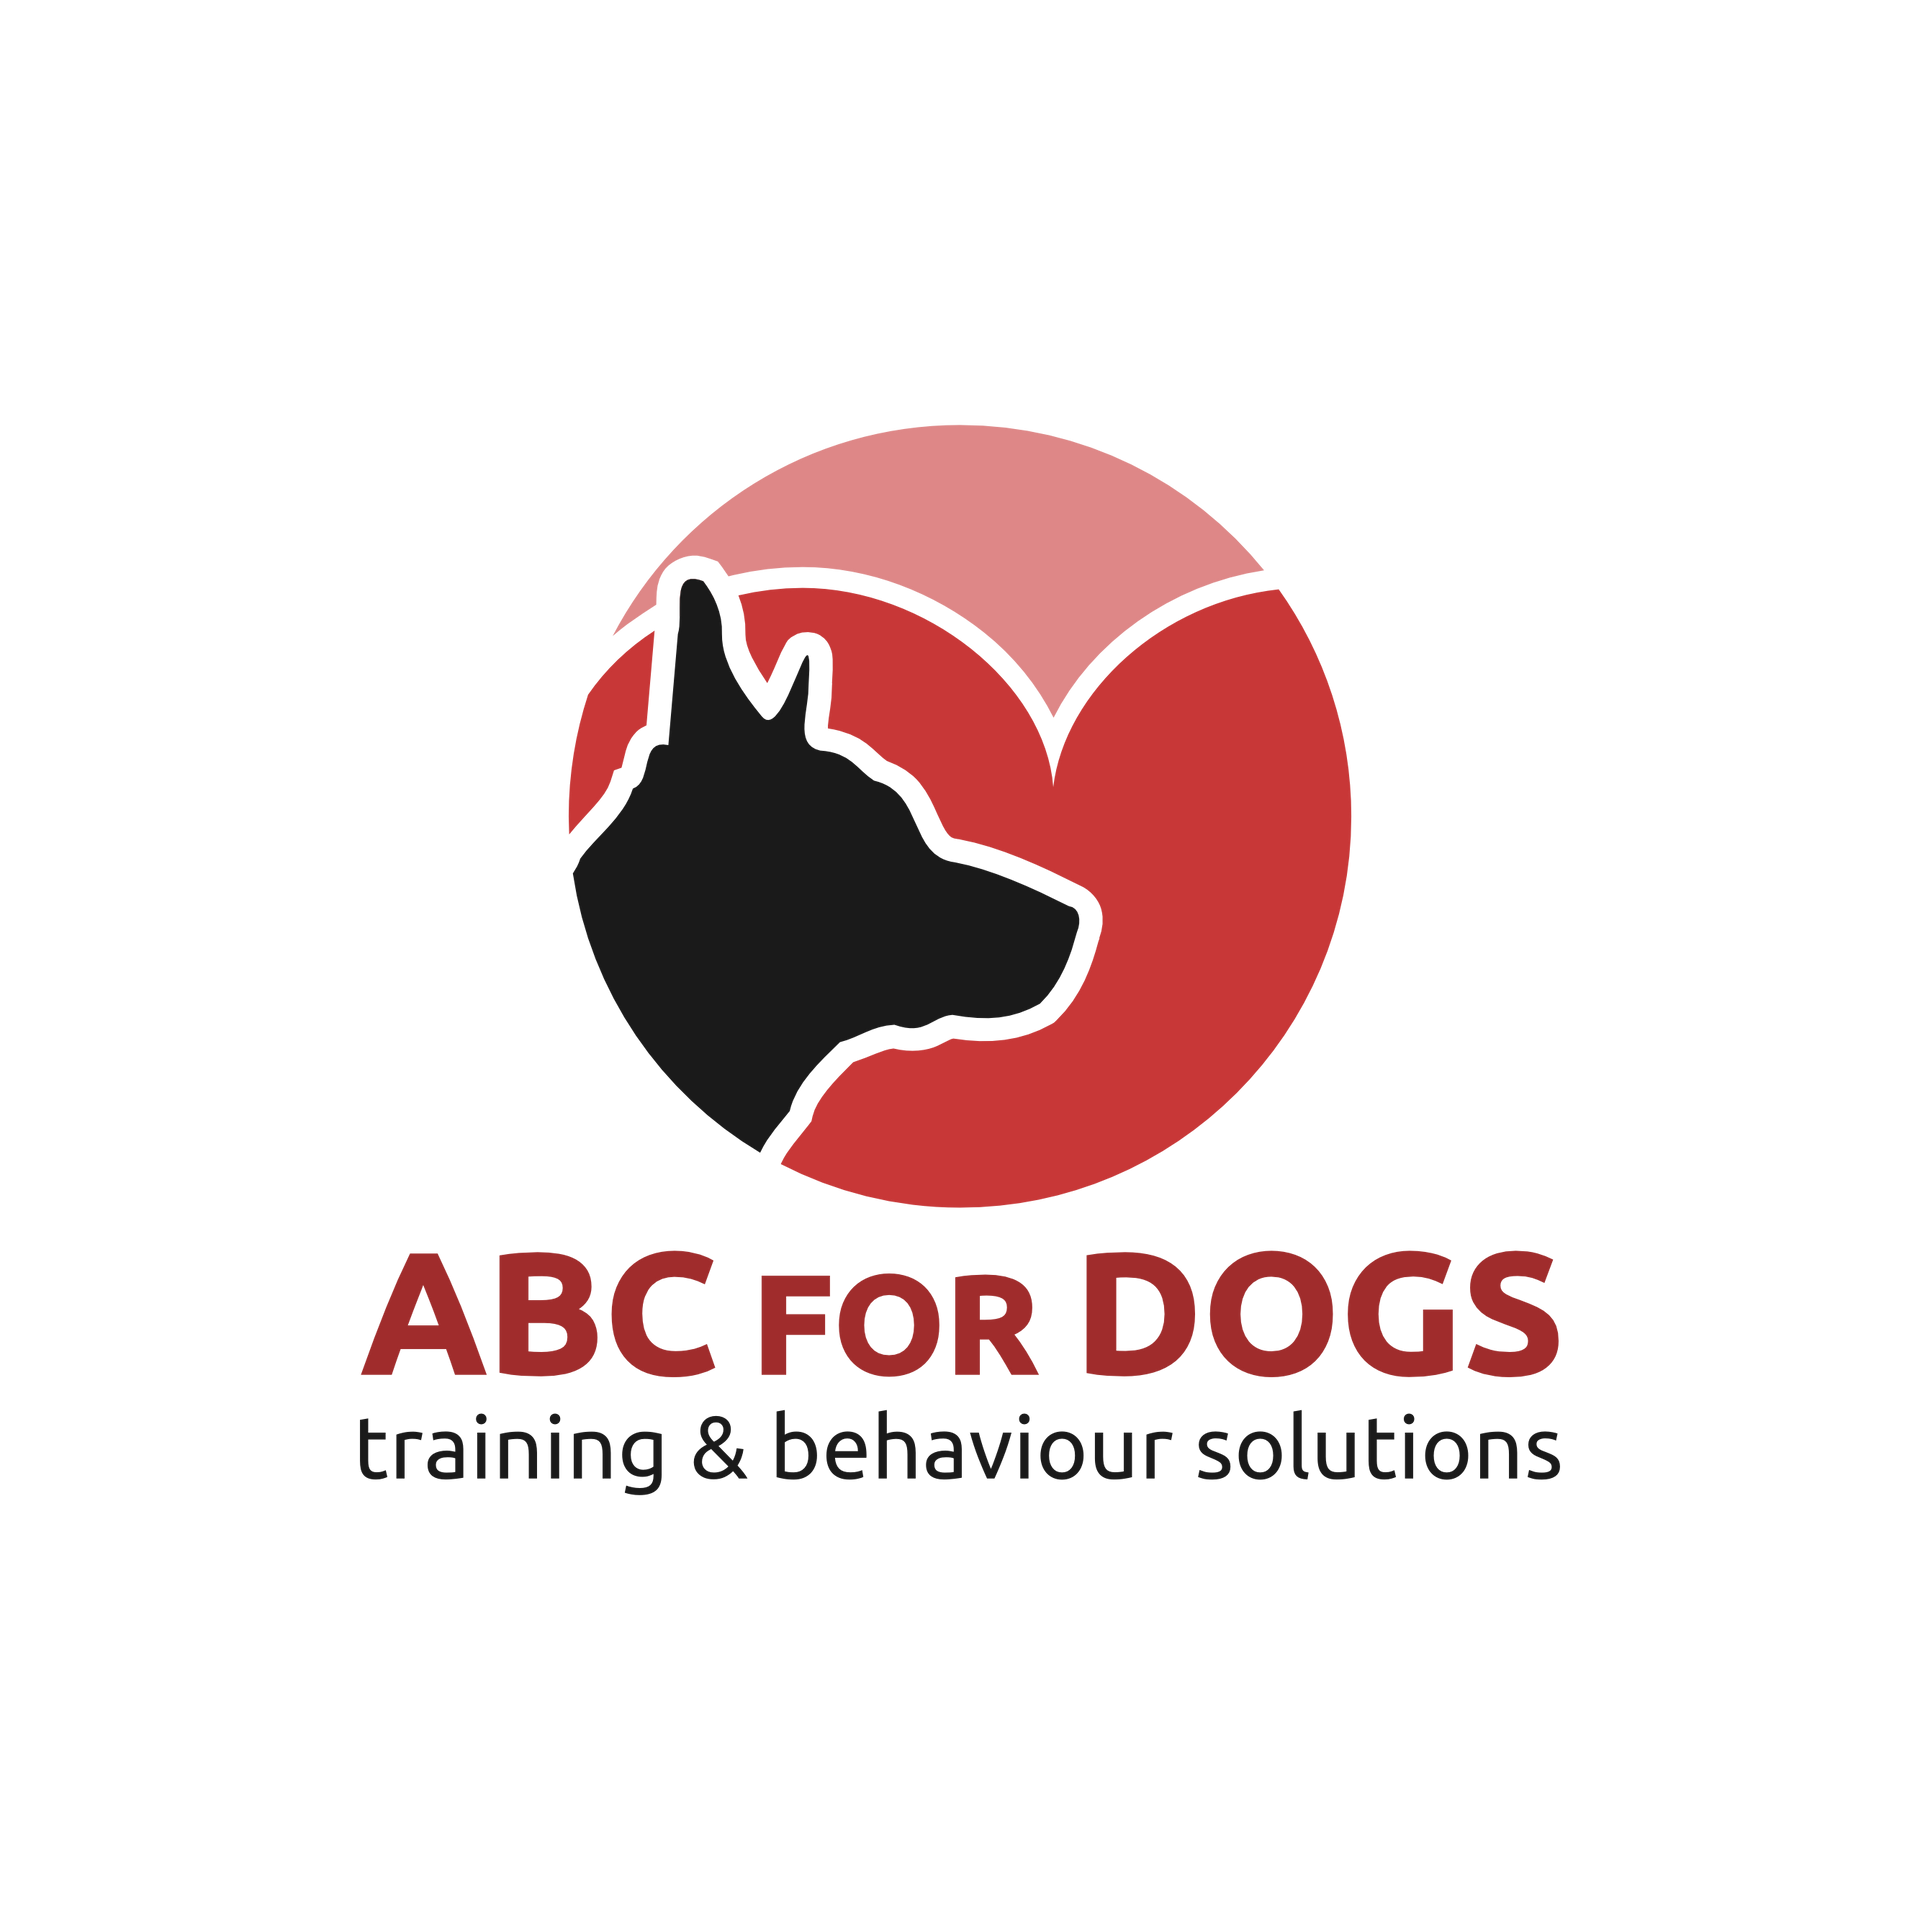 ABC For Dogs dog trainers logo